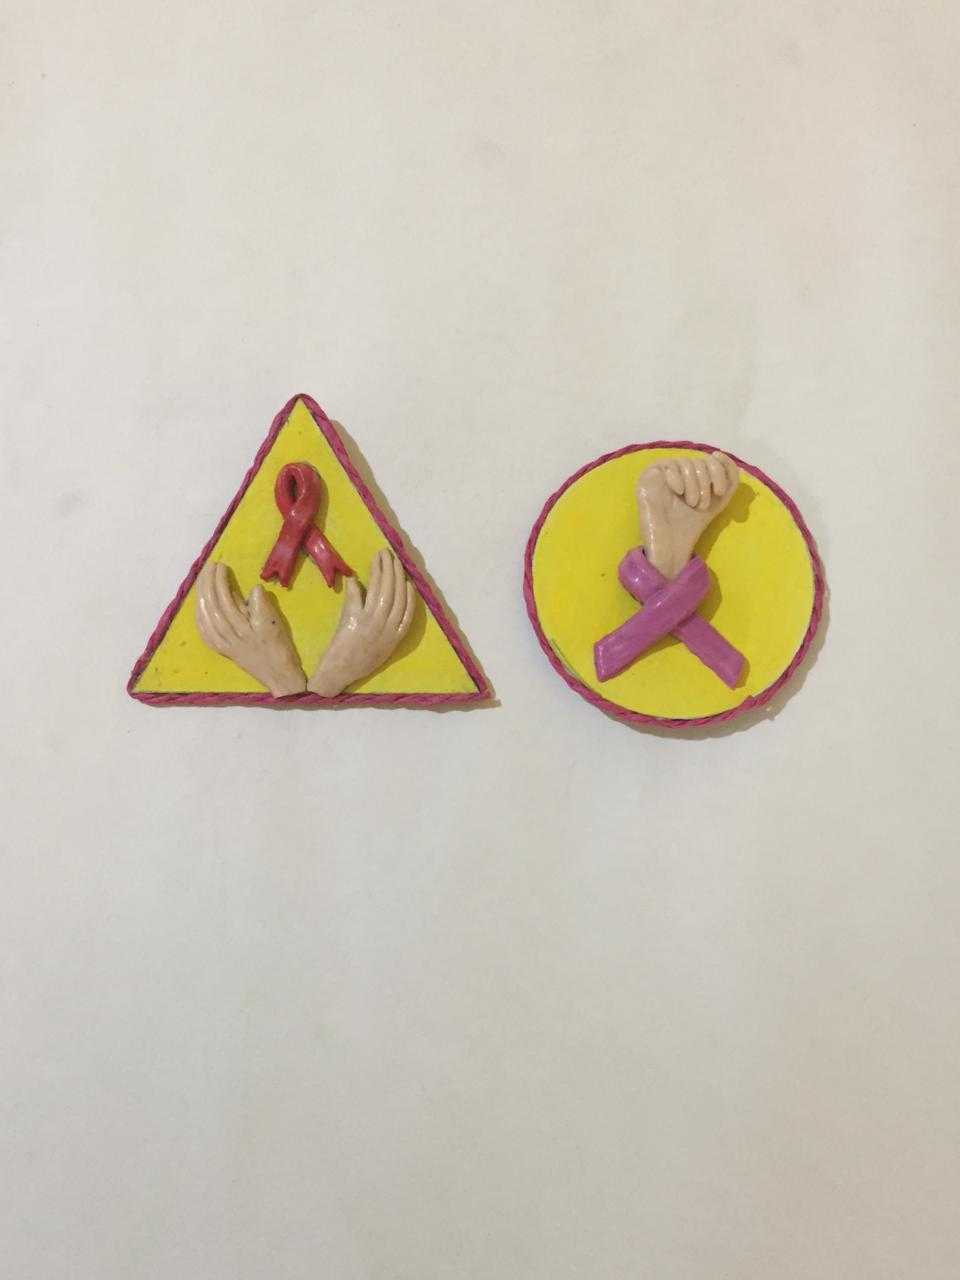 Creating a DIY Cancer Day Badge with Clay Craft Ideas 